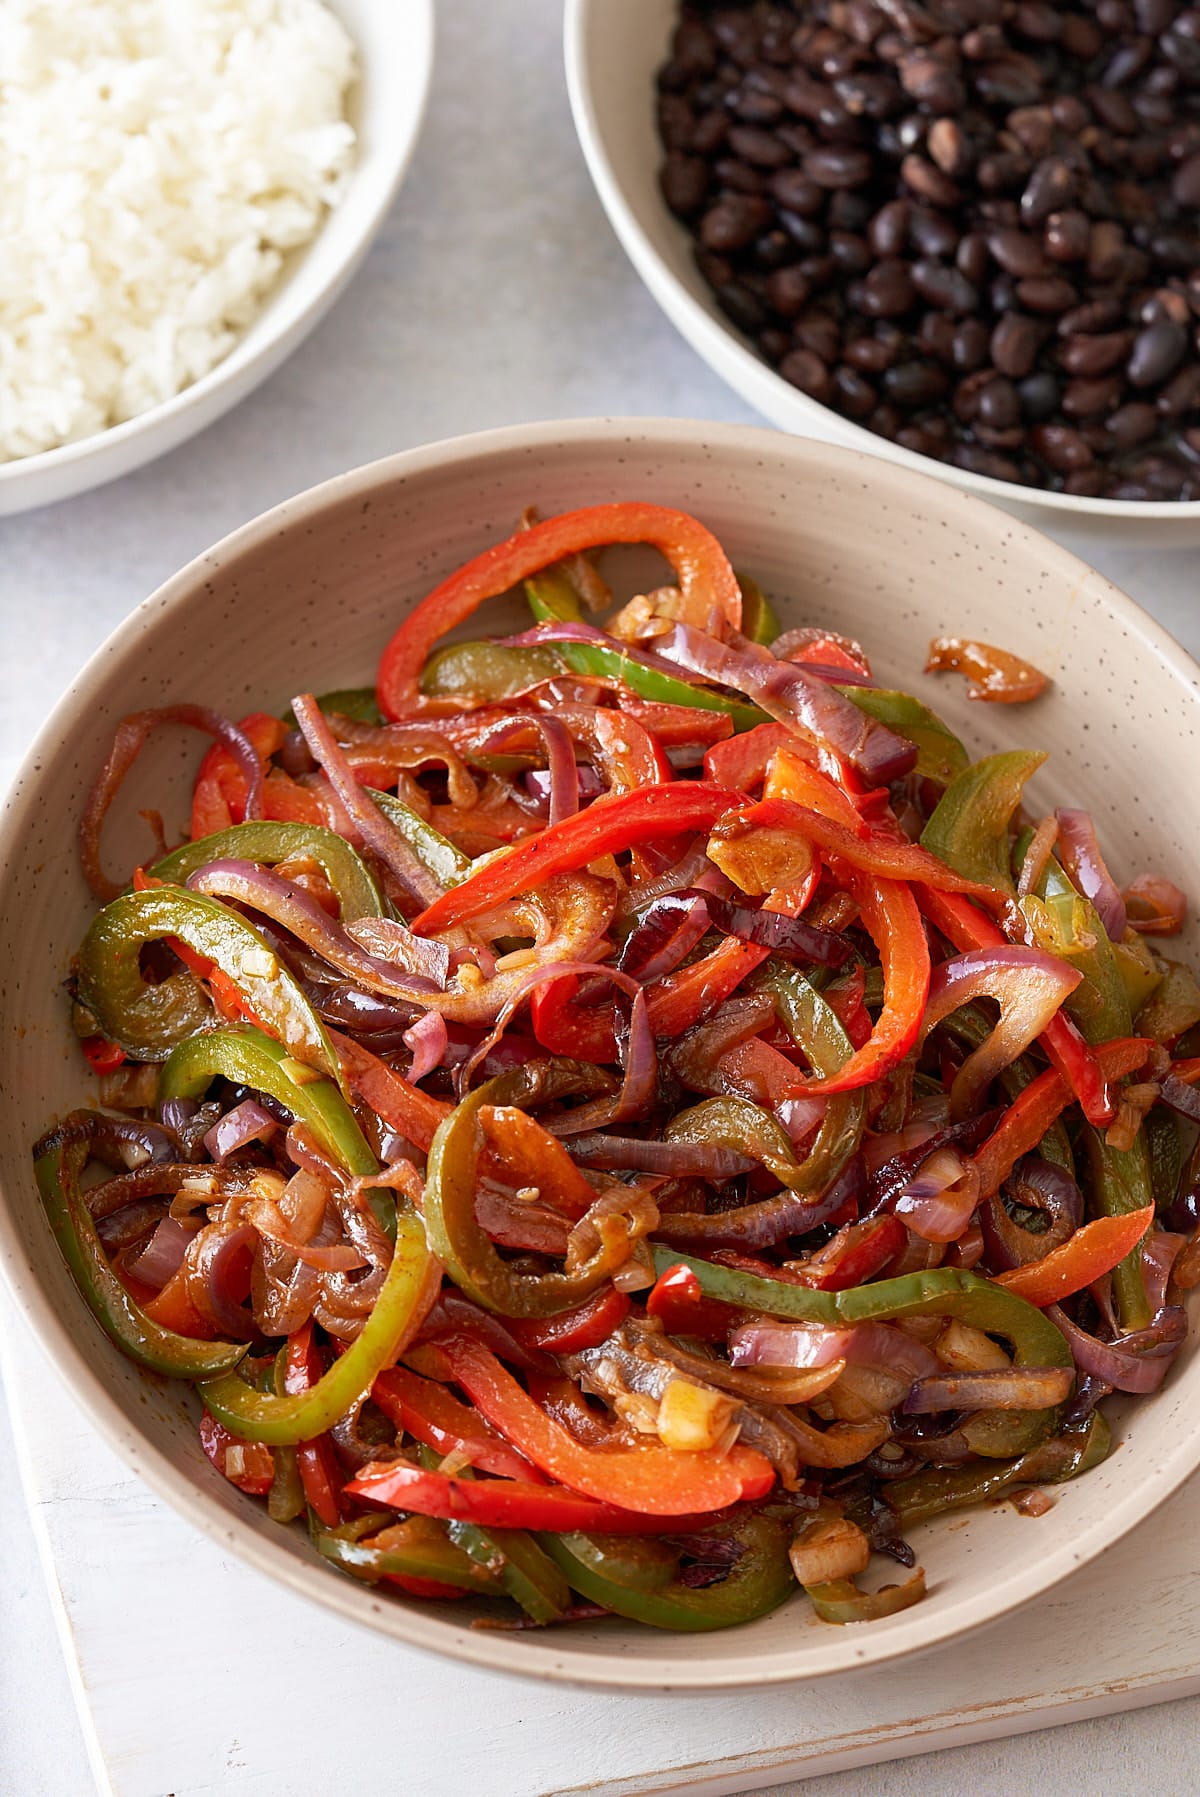 A large serving dish filled with fajitas vegetables, with bowls of steamed white rice and black beans set alongside.